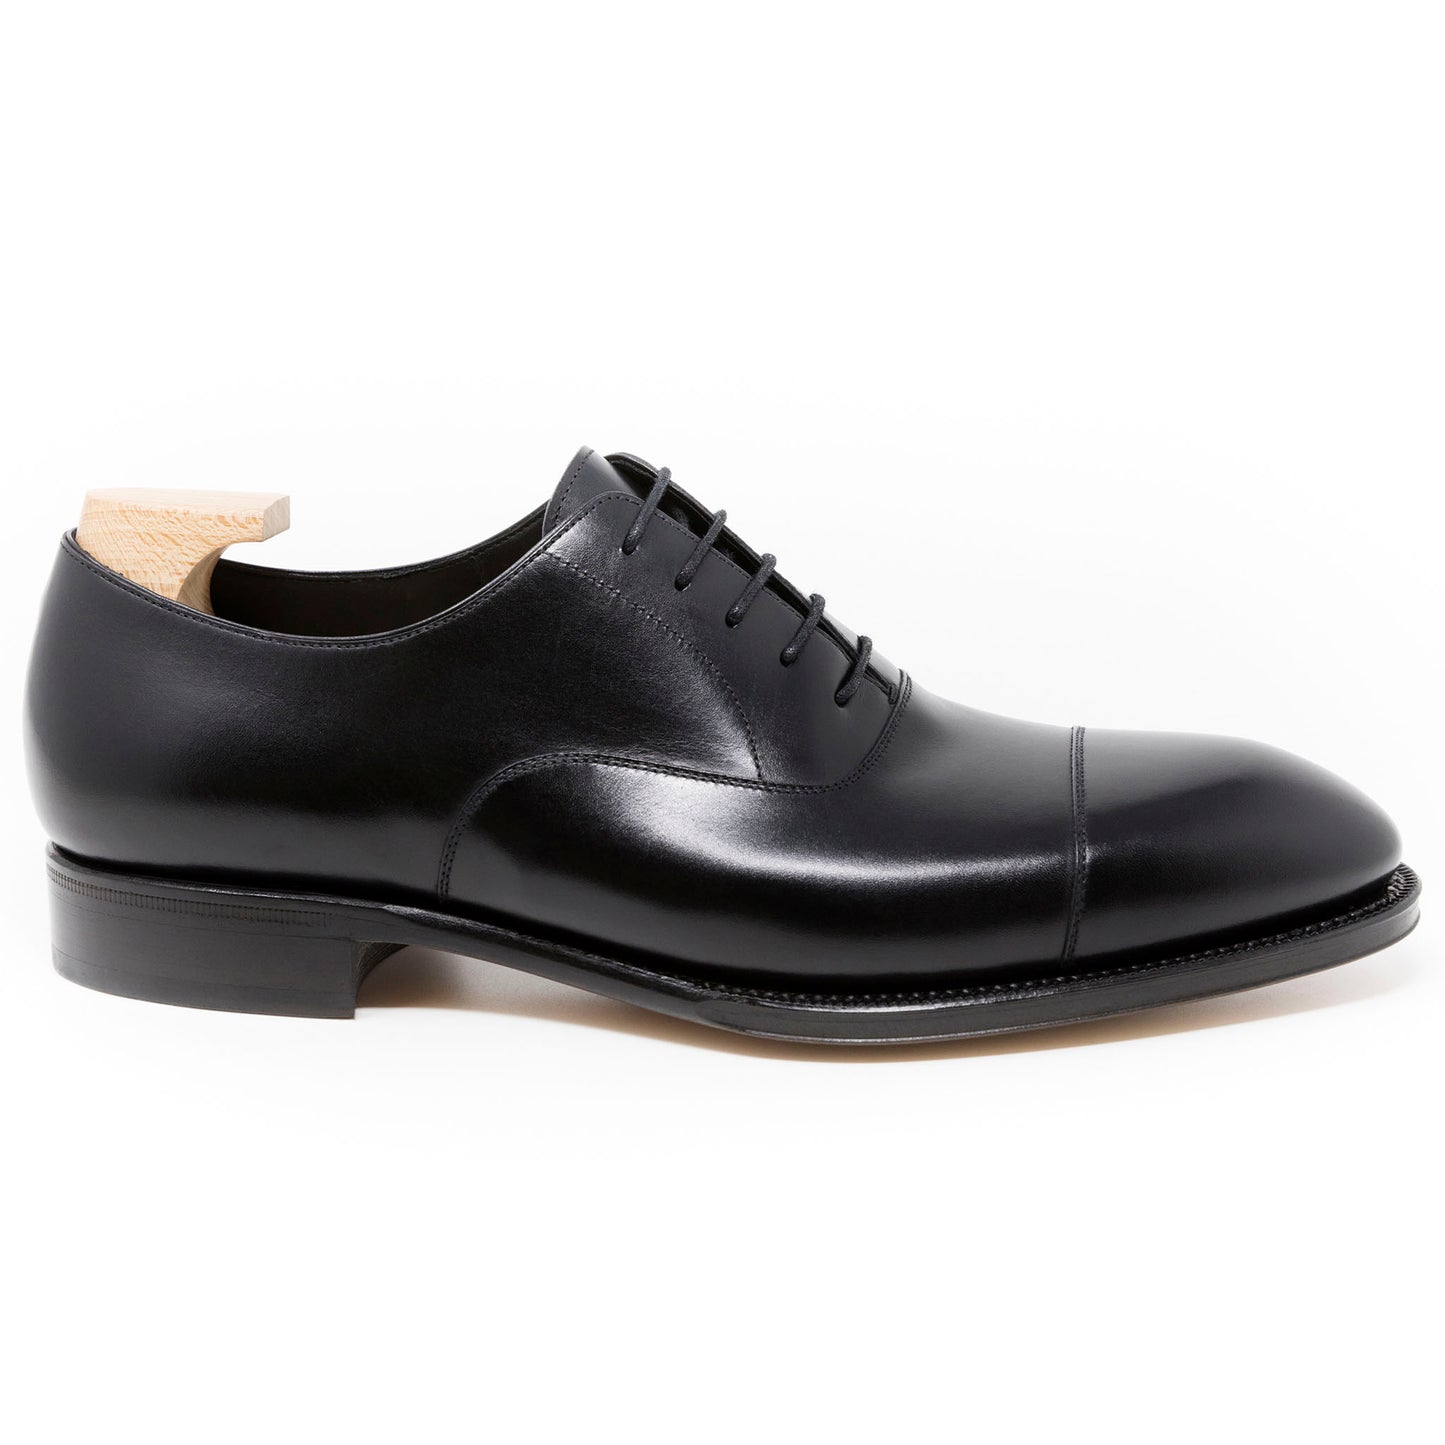 TLB Mallorca leather shoes LEWIS